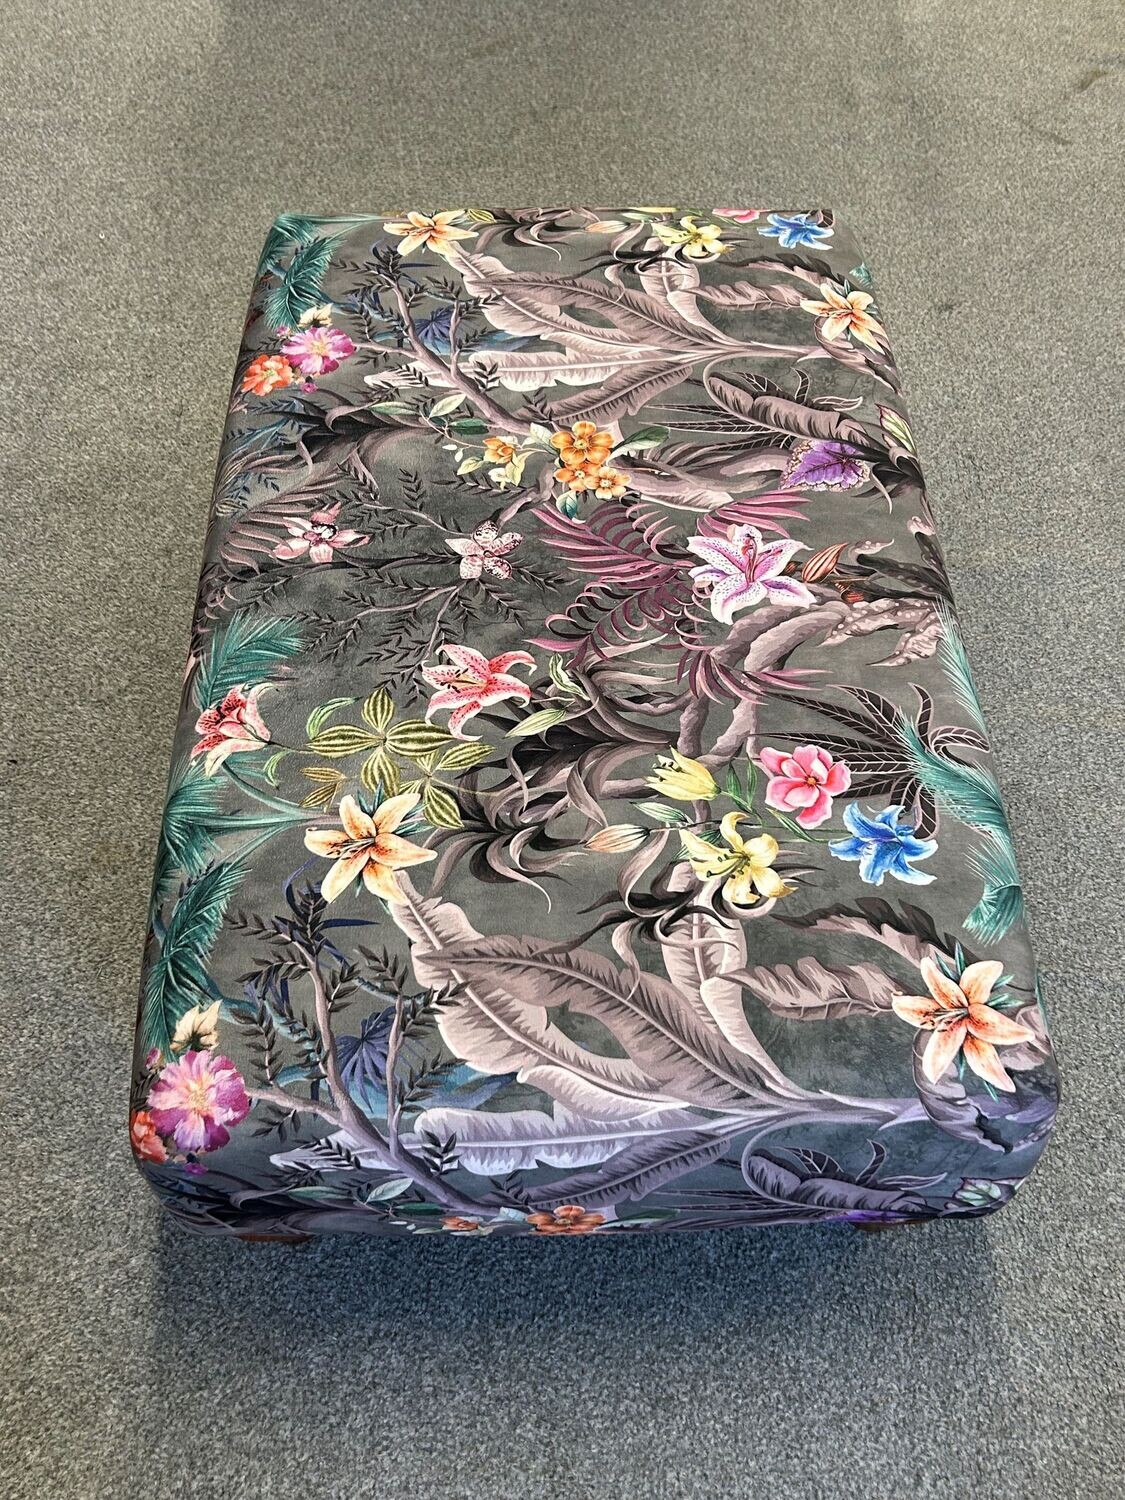 Lucinder Collection - Bespoke Footstool - Lillies